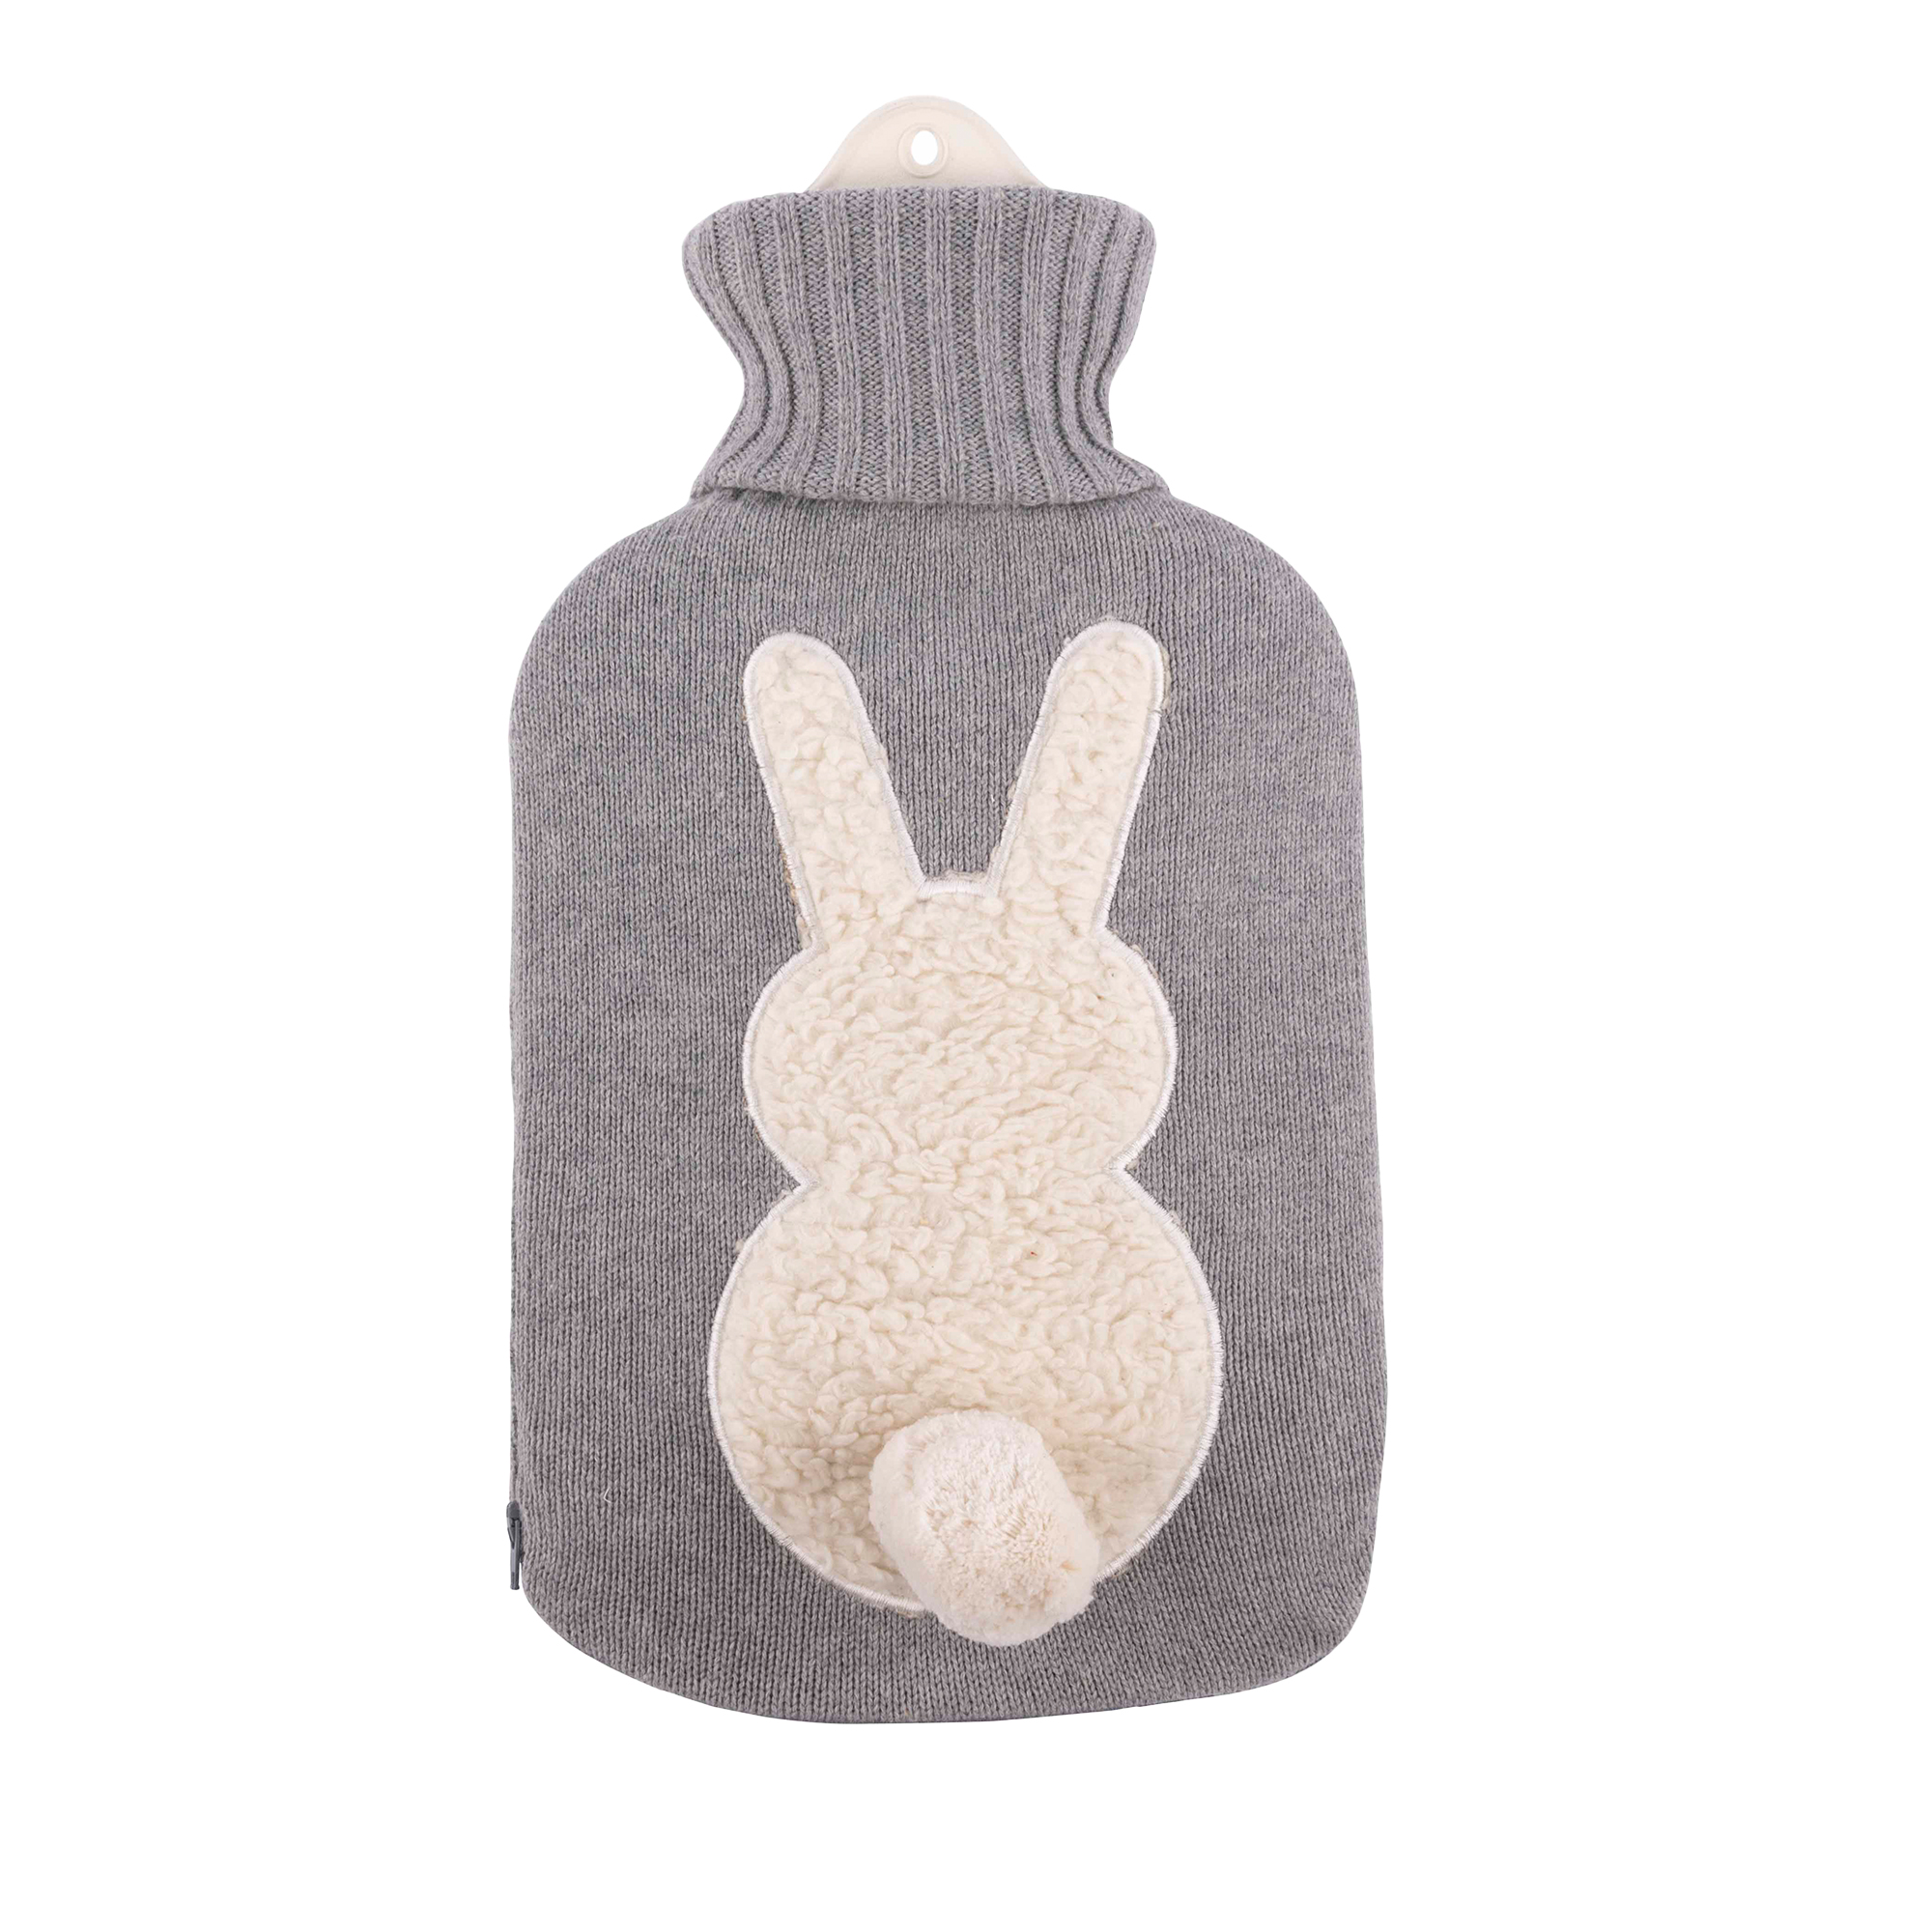 Sänger 2.0 Liter Hot Water Bottle with Cotton Knit Cover "Bommel"